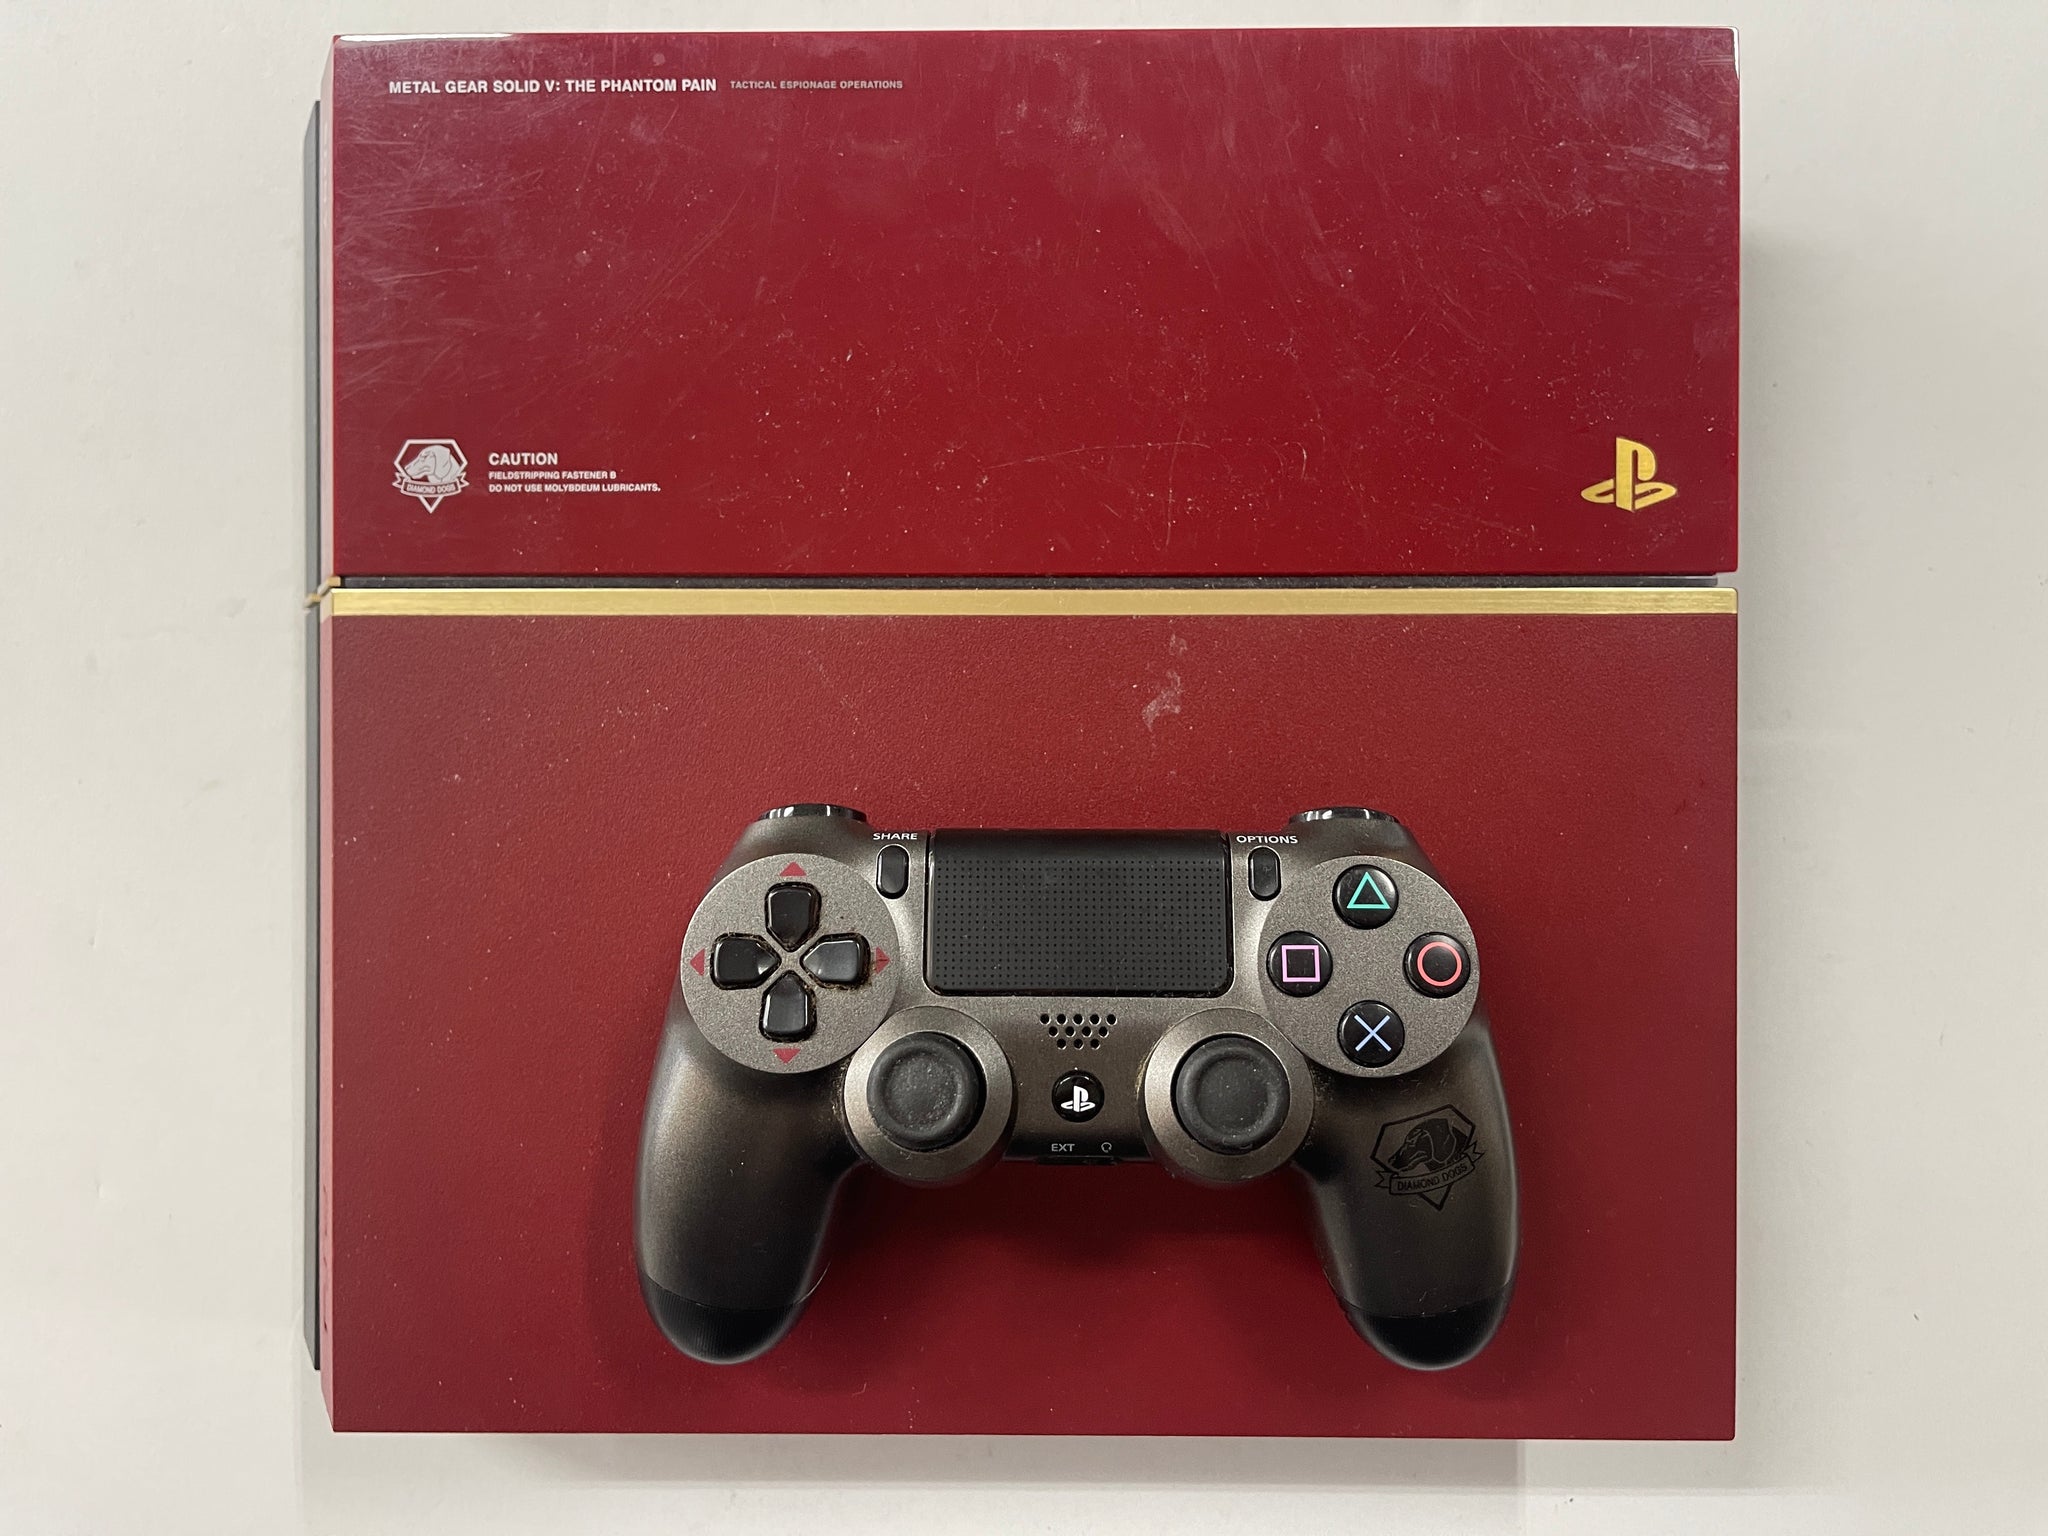 Limited Edition Metal Gear Solid V The Phantom Pain Playstation 4